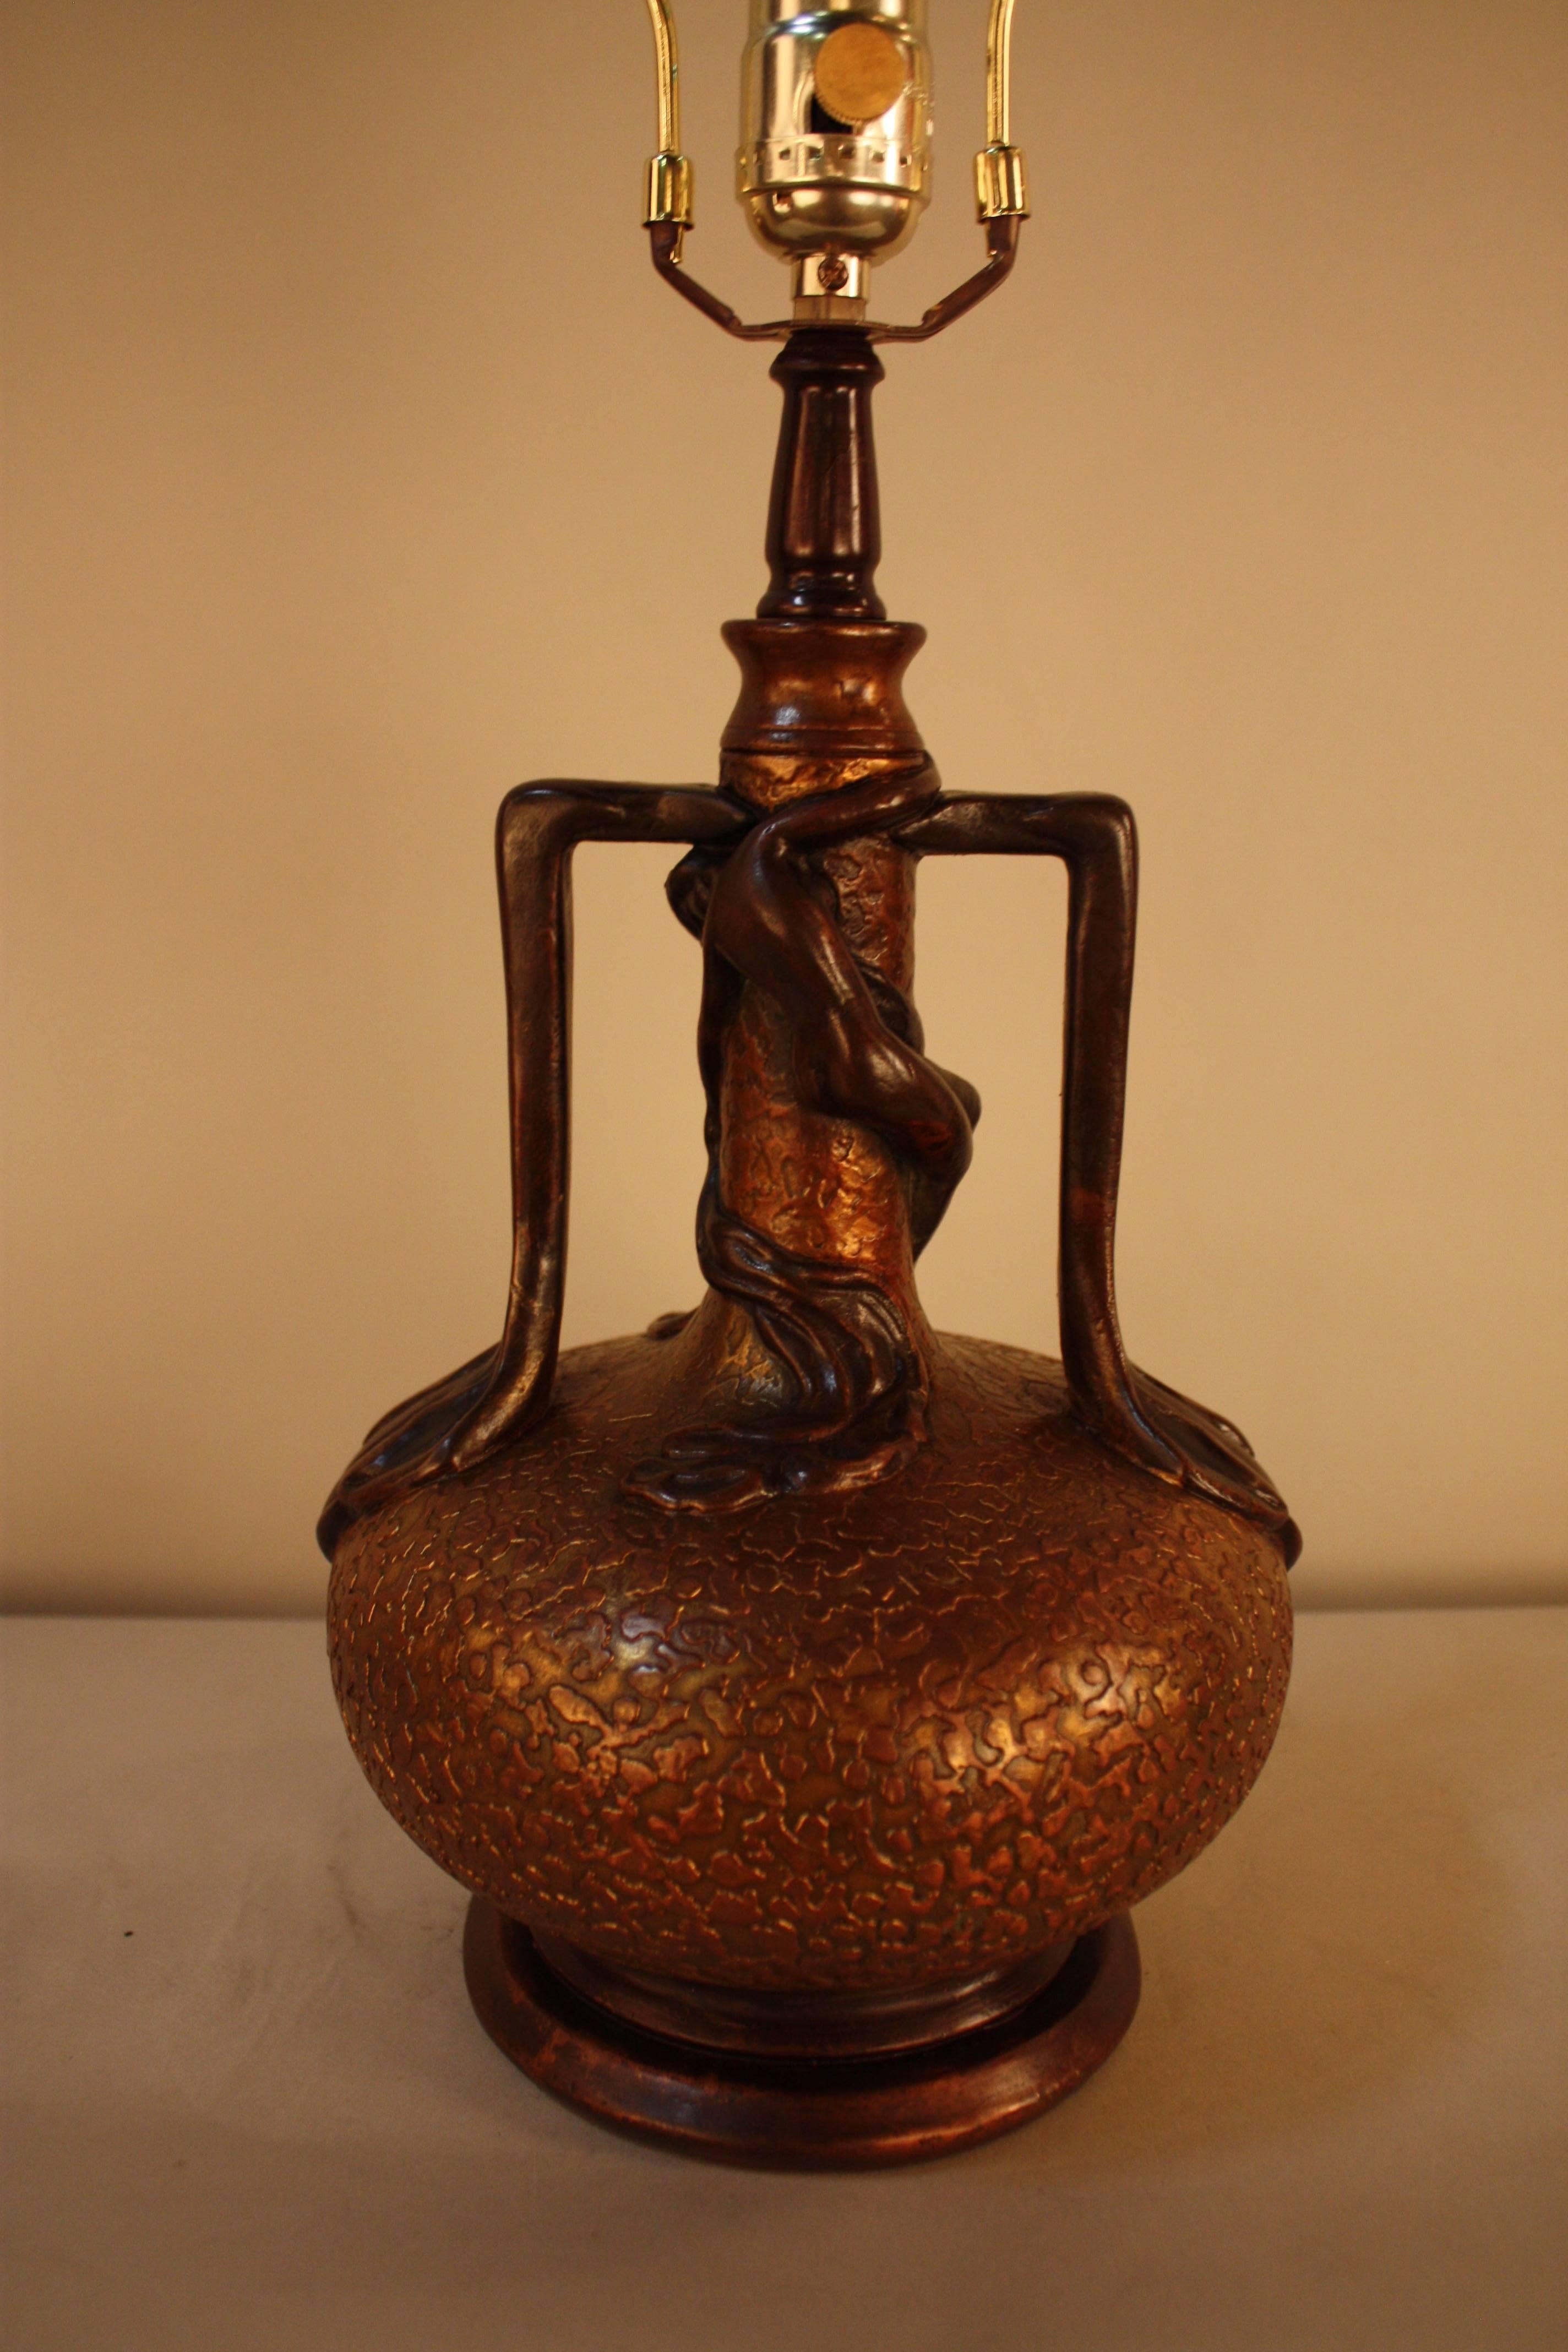 This gorgeous lamp has strong organic element as well as art nouveau influence by softly an woman has wrapped herself around upper part of the lamp.
Originally combination of gold plate oxidized over copper but the gold has been semi oxidized. 

